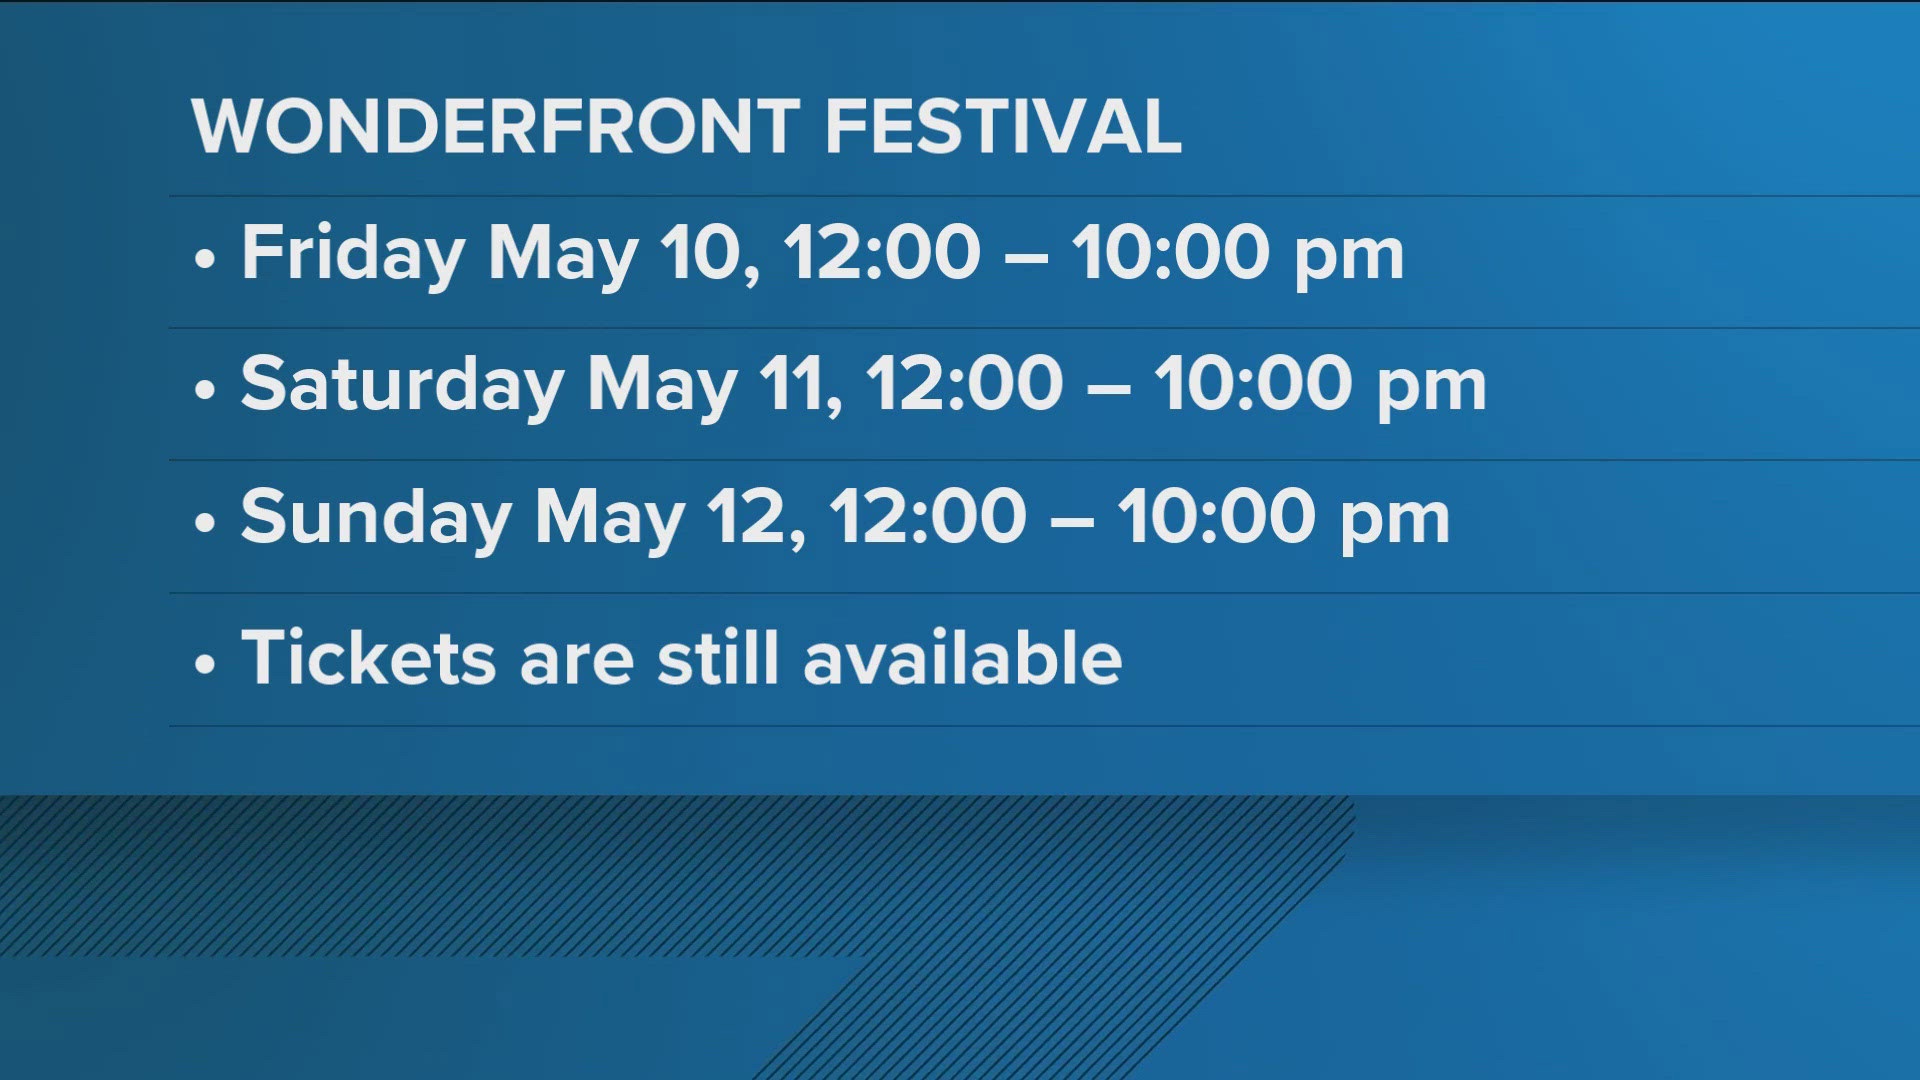 The three-day music and arts festival is back on starting May 10 through May 12